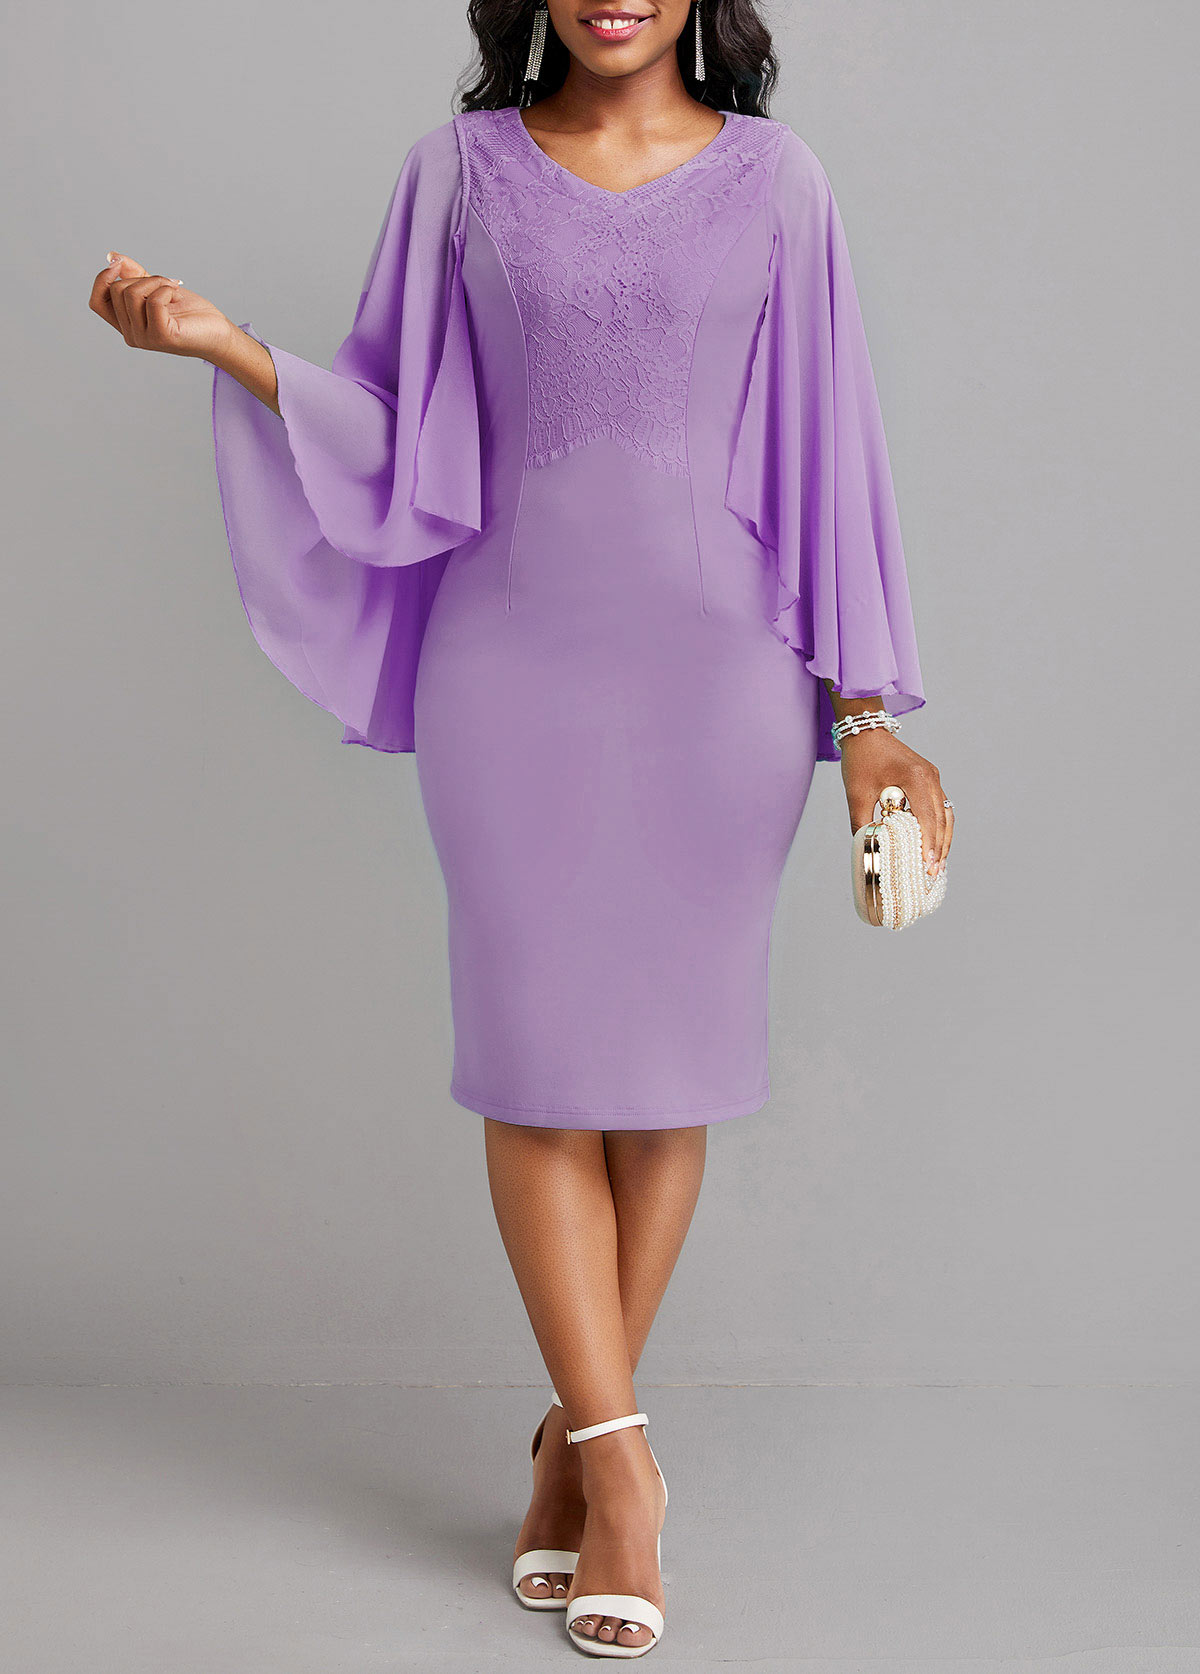 Neon Violet Patchwork Long Sleeve Bodycon Dress